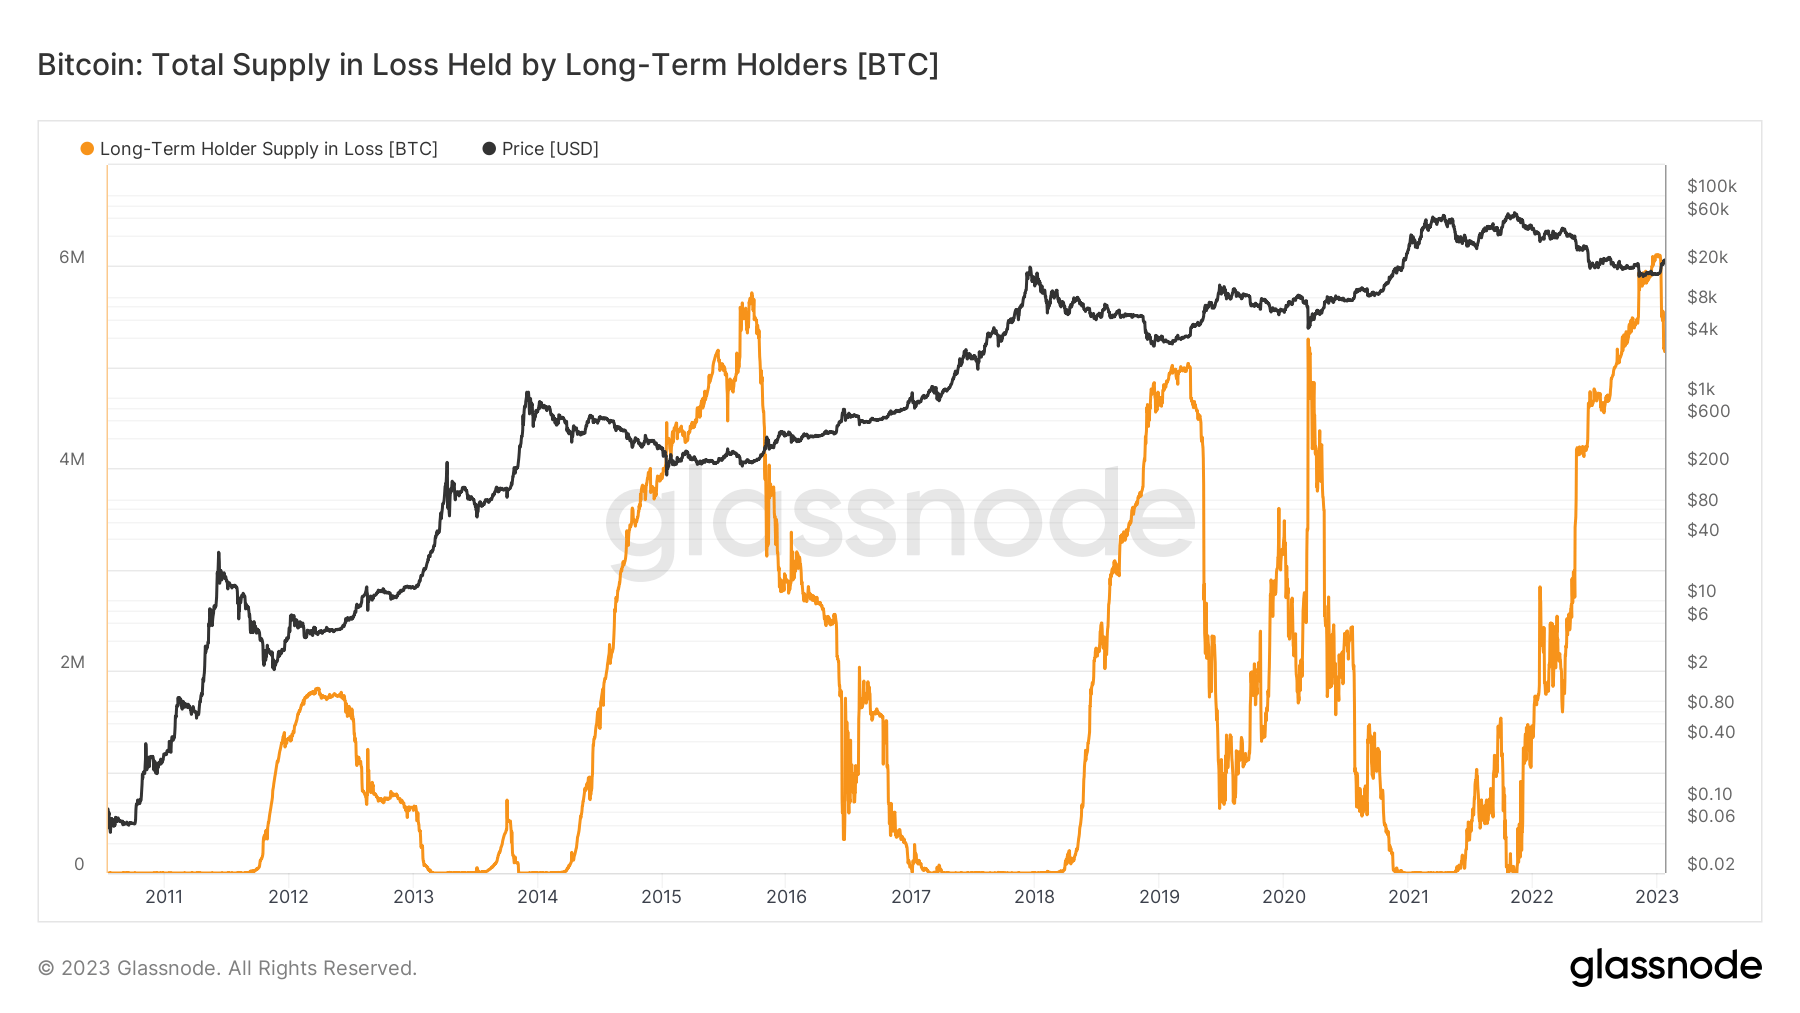 Bitcoin supply in long-term holders of losses